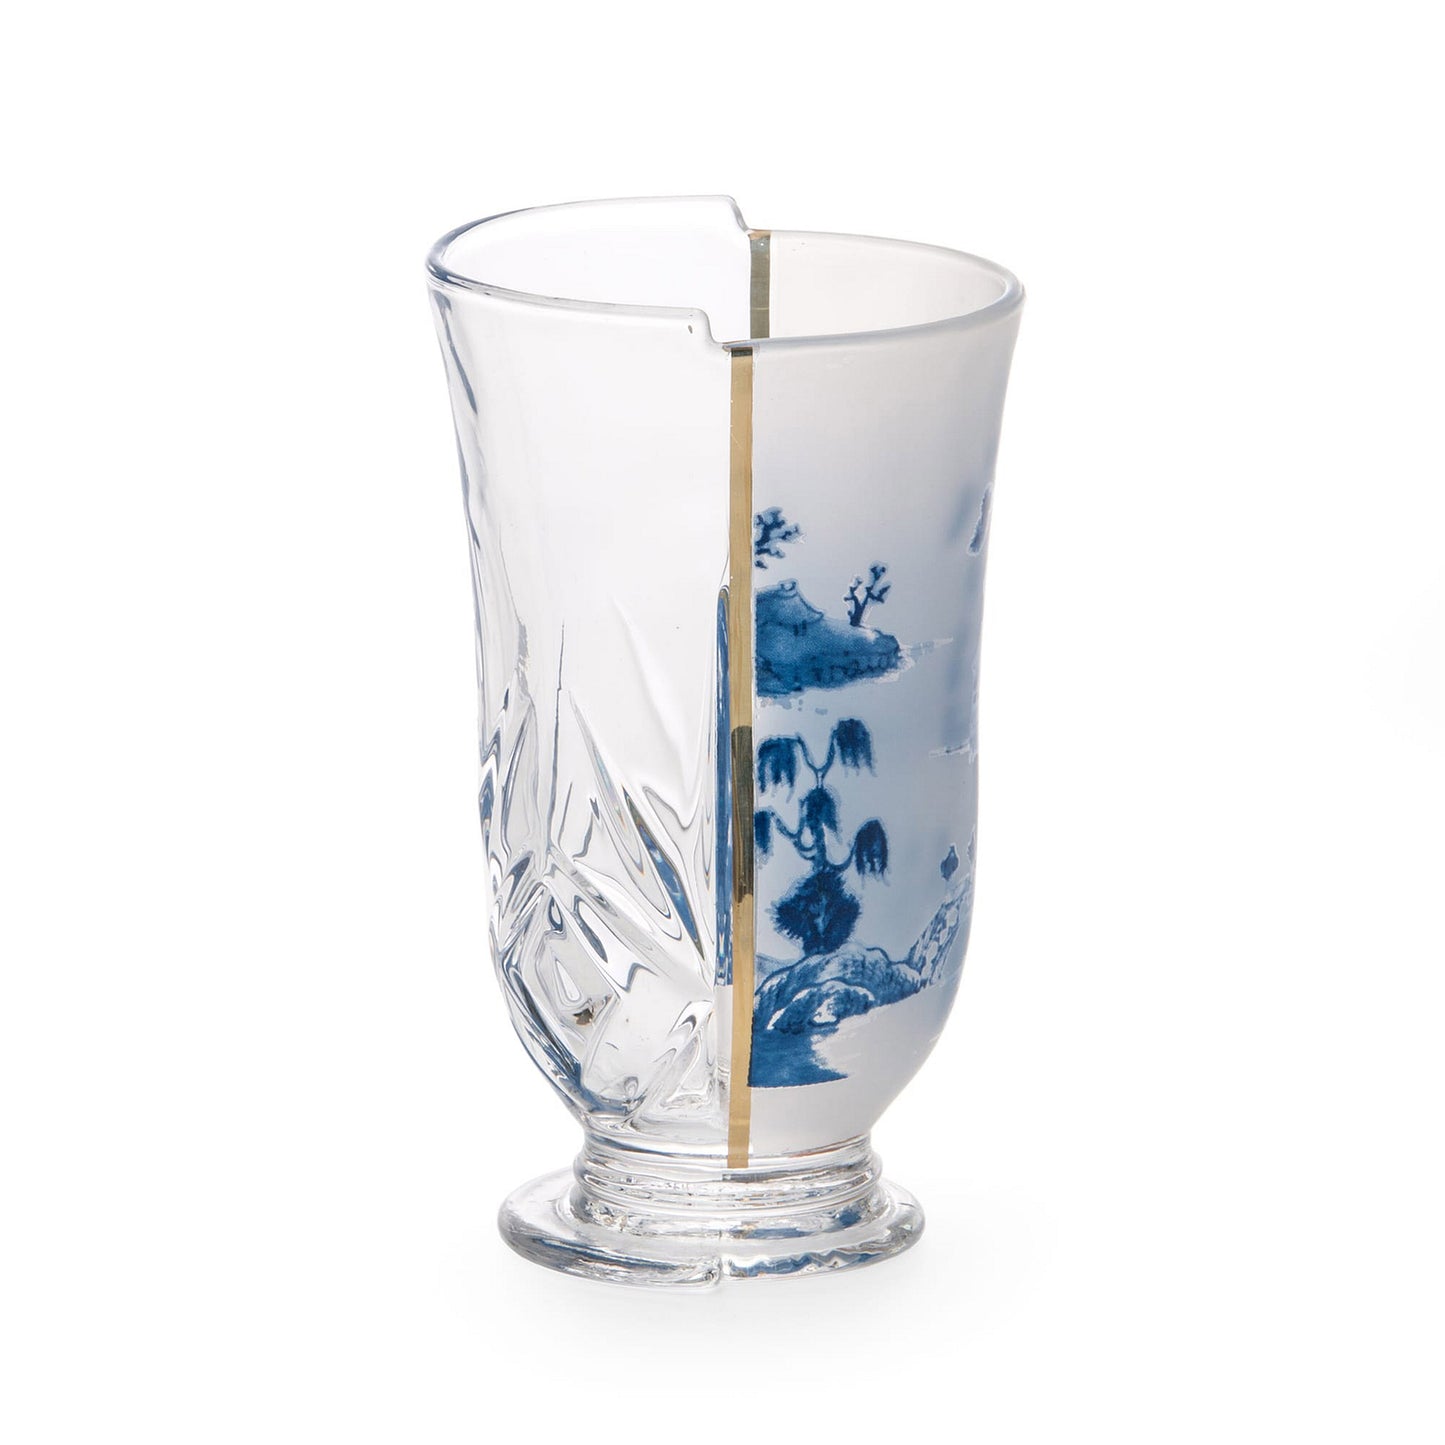 Seletti Clarice Cocktail Glasses - Set of 3